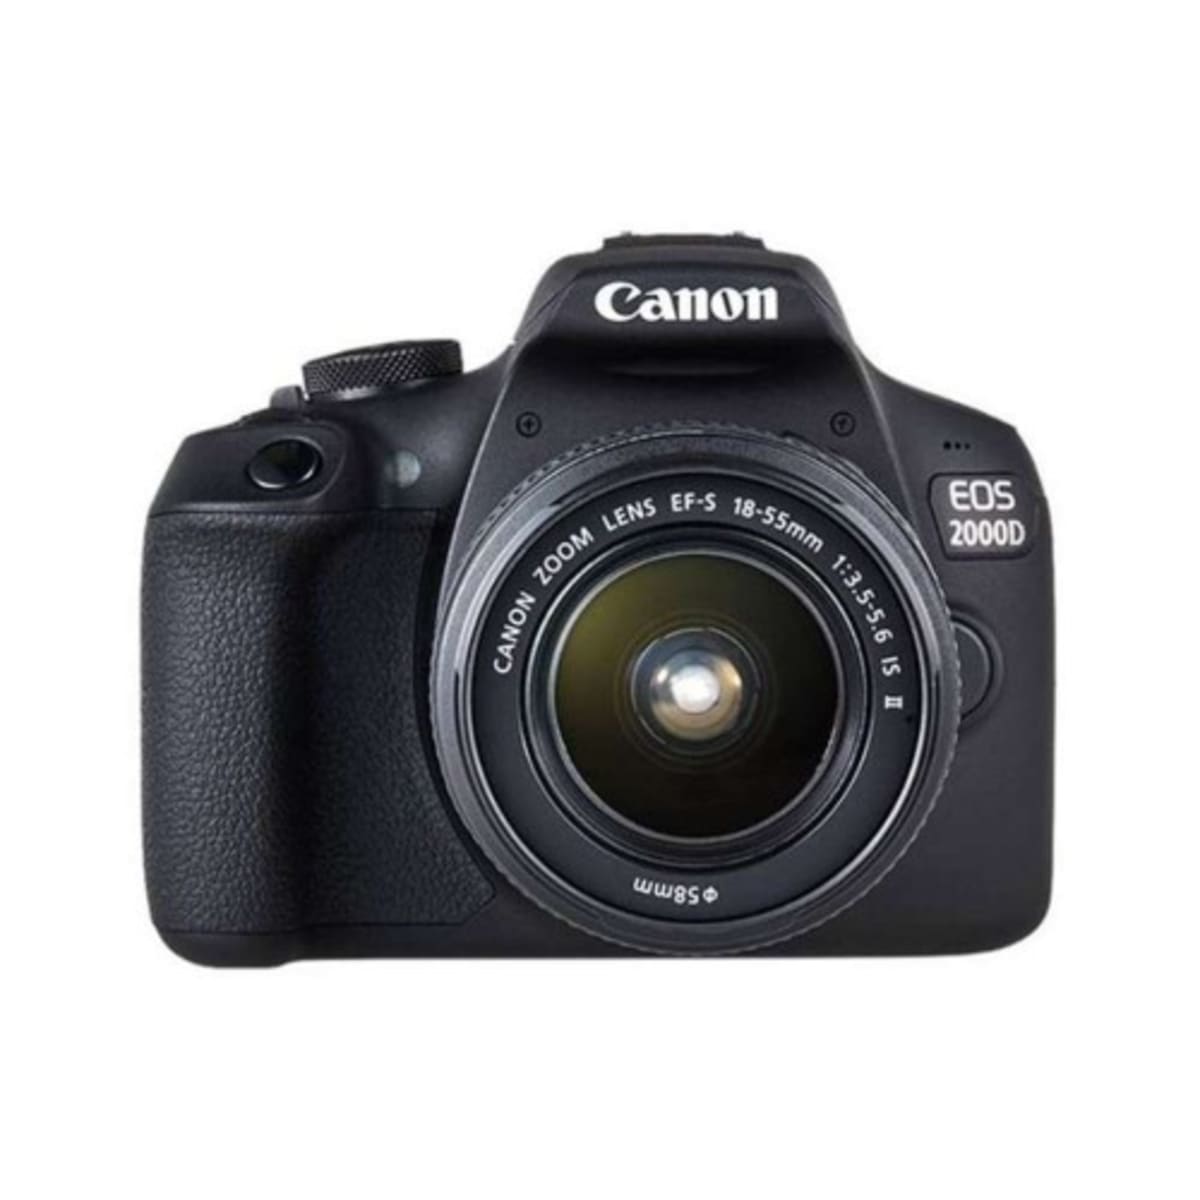 Canon EOS 2000D / Rebel T7 DSLR Camera with 18-55mm Lens +